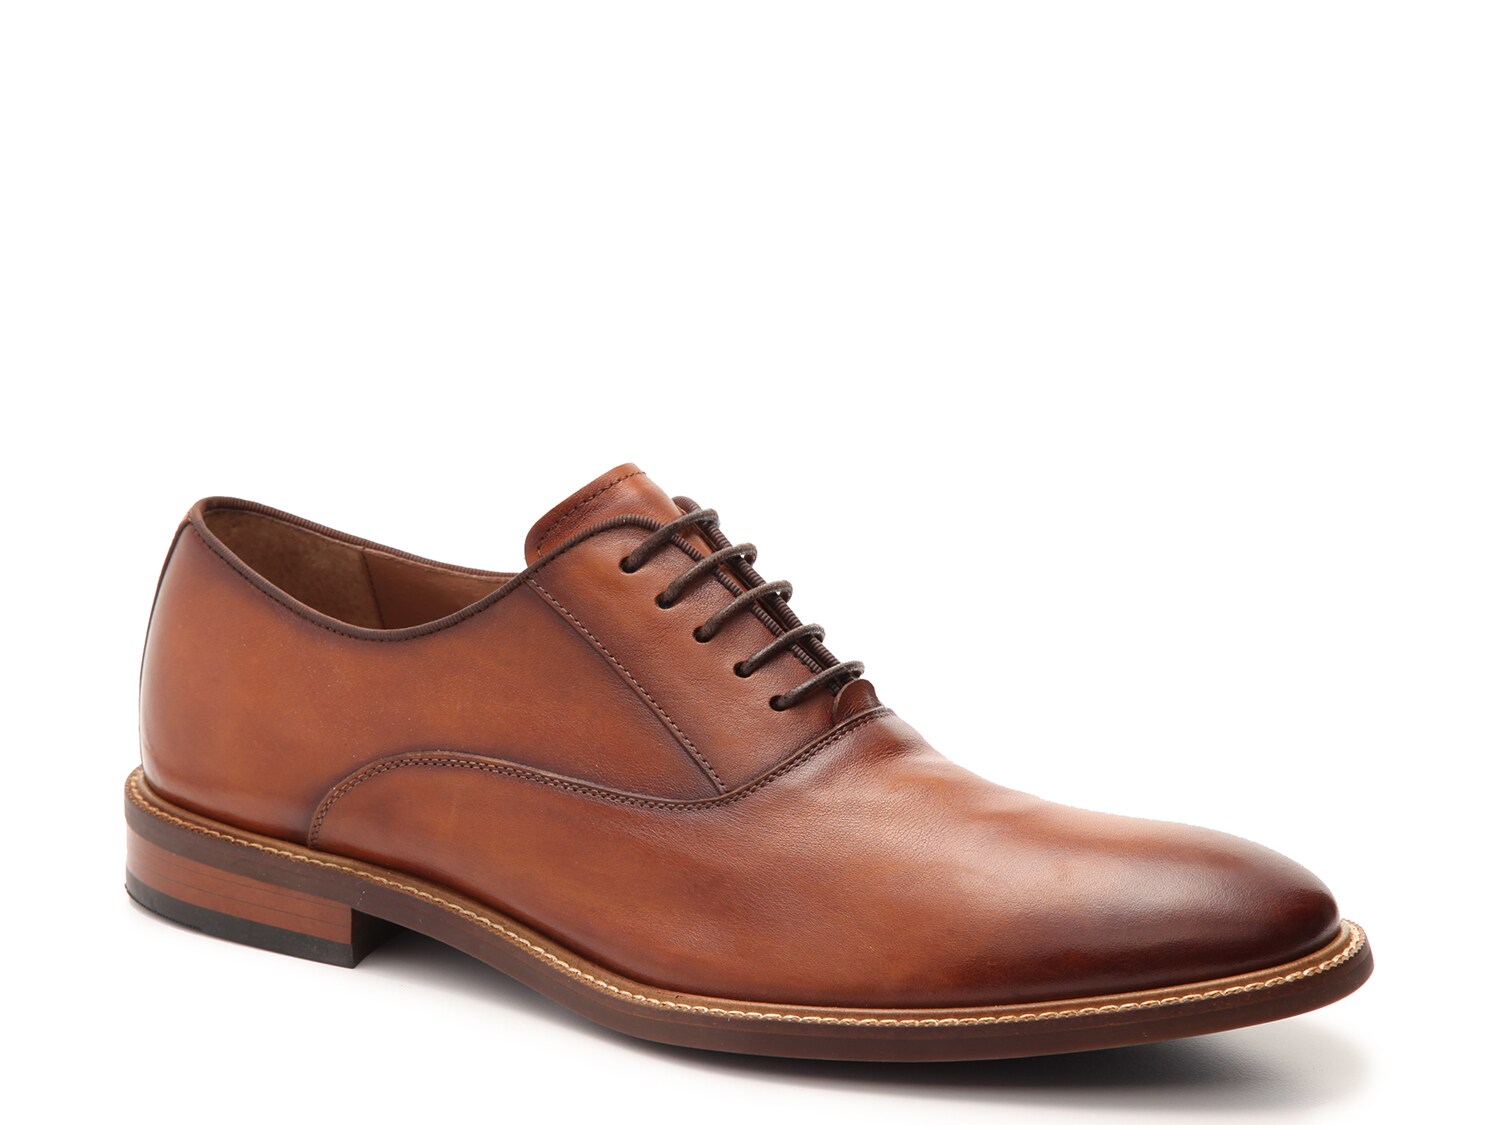 Men's Shoes Only at DSW | DSW